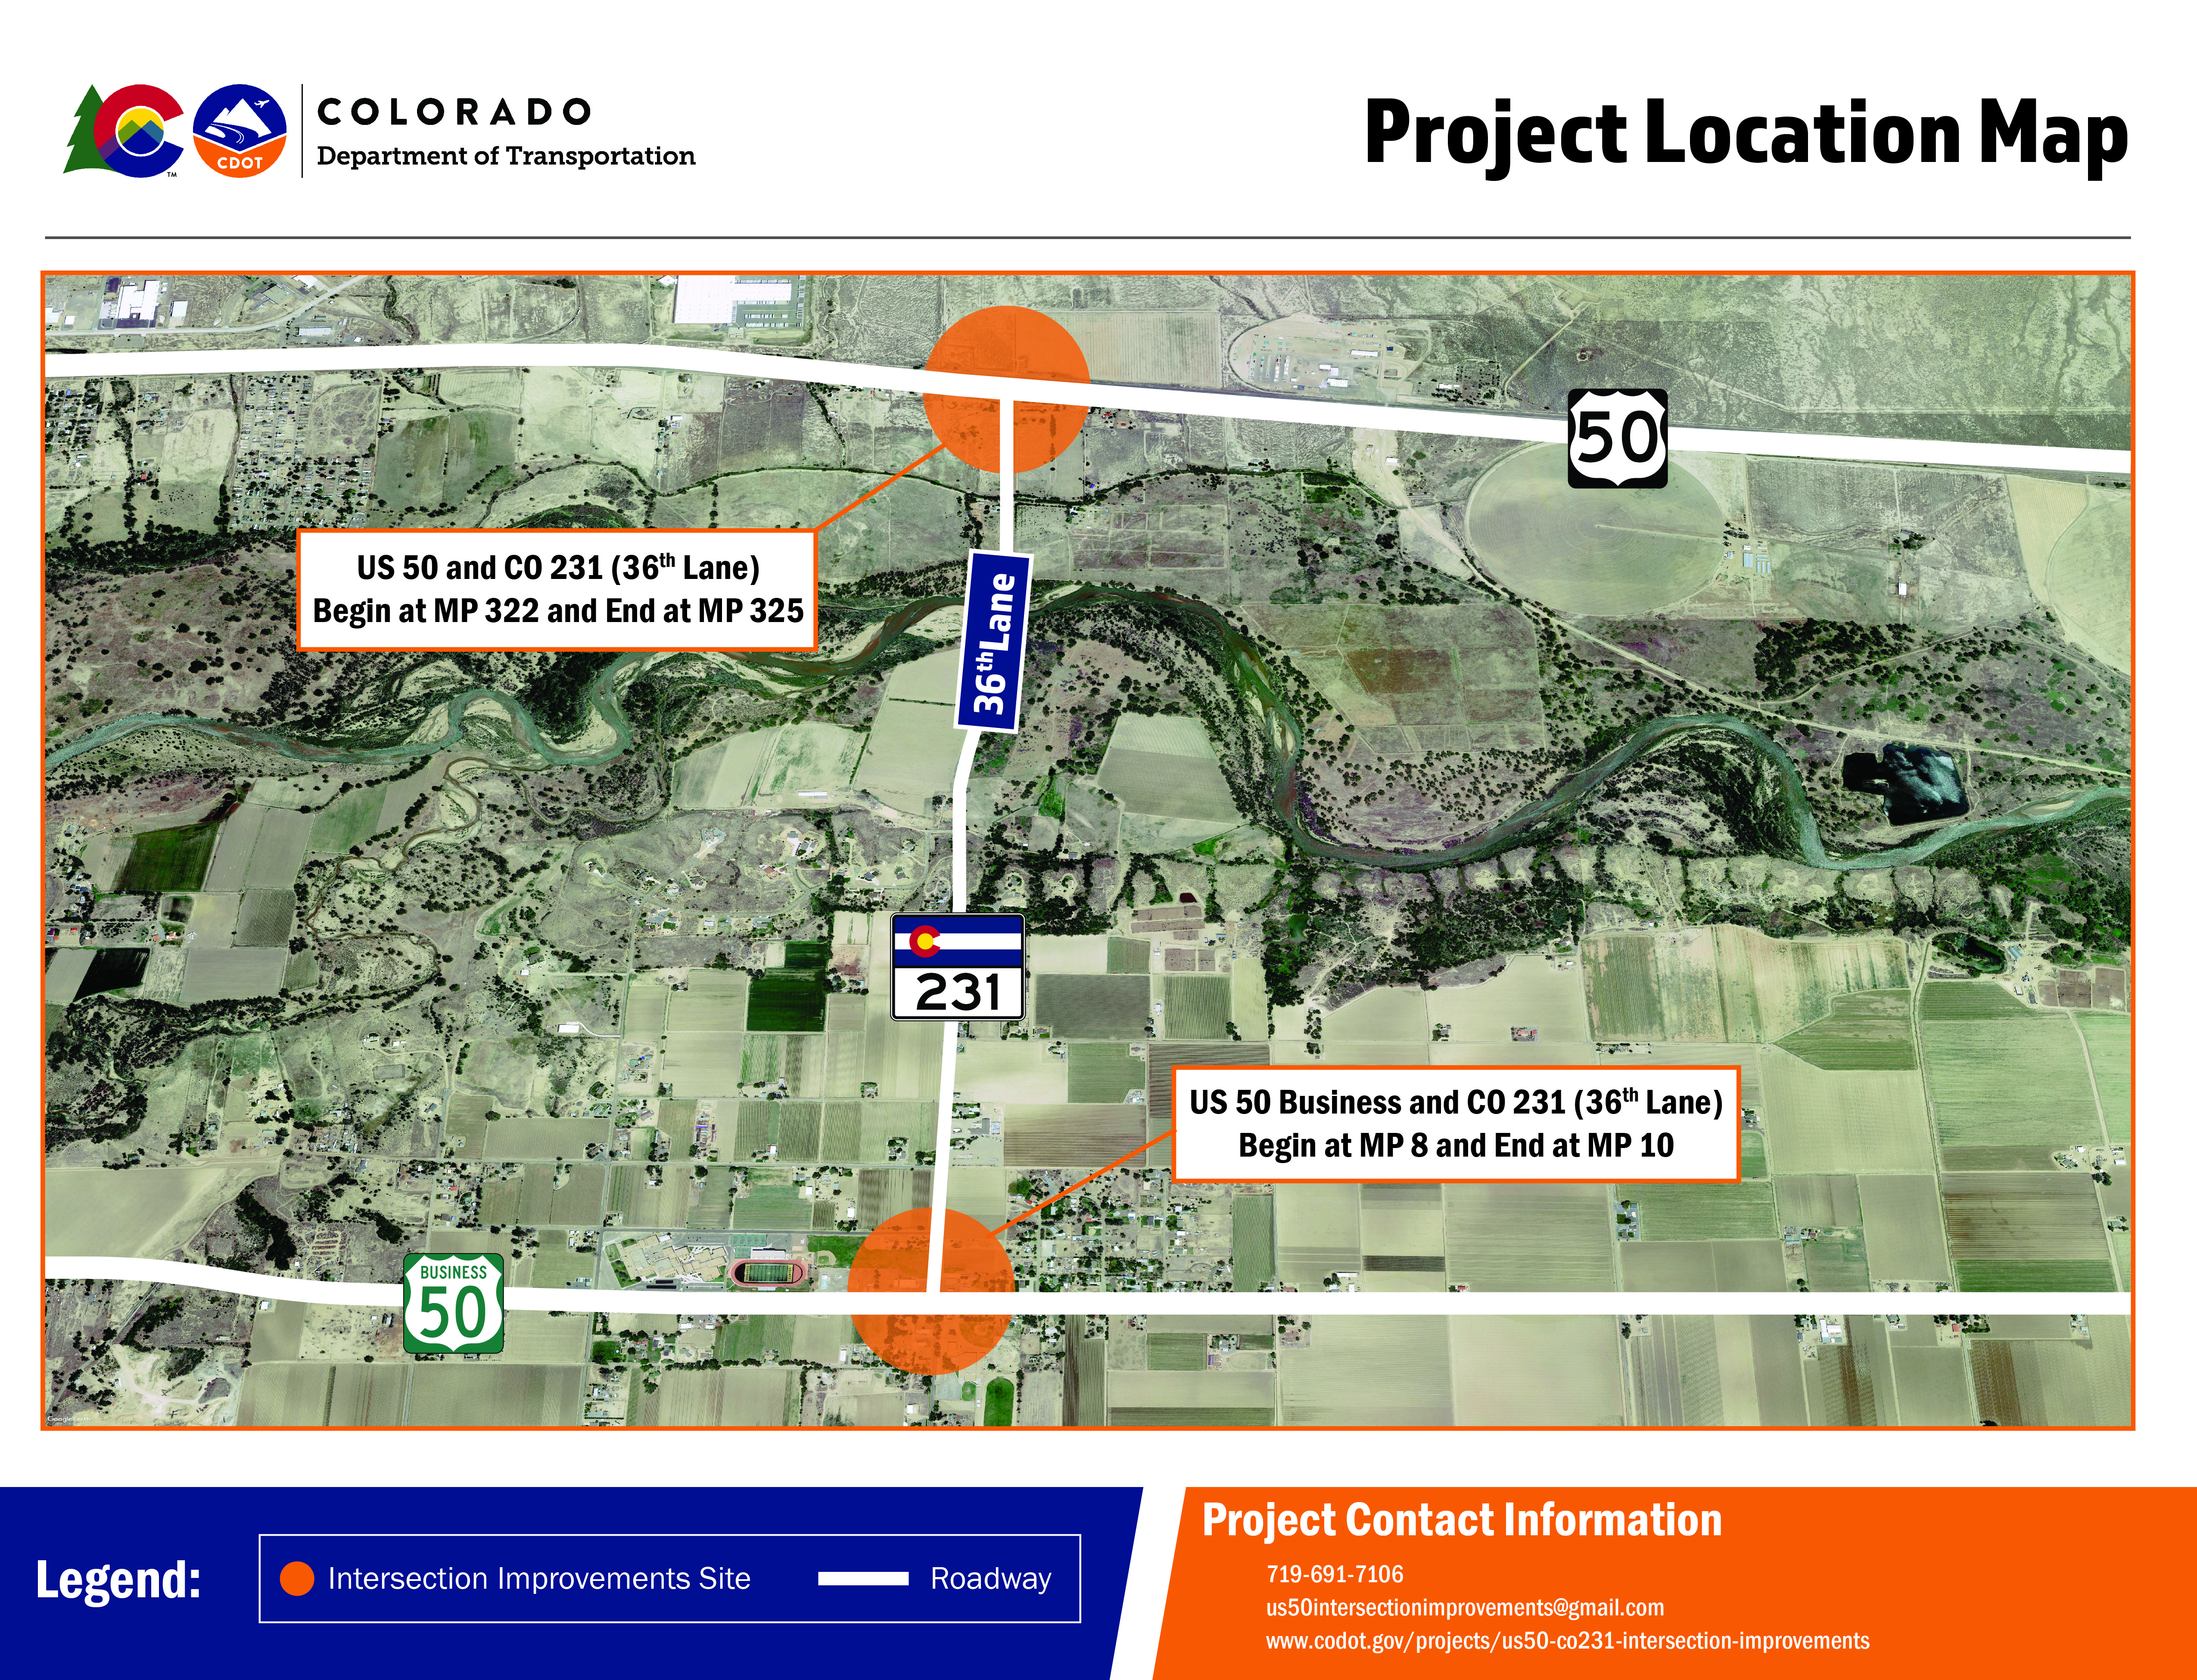 US 50 and CO 231 Project Location Map v2 9.12.23-01.jpg detail image